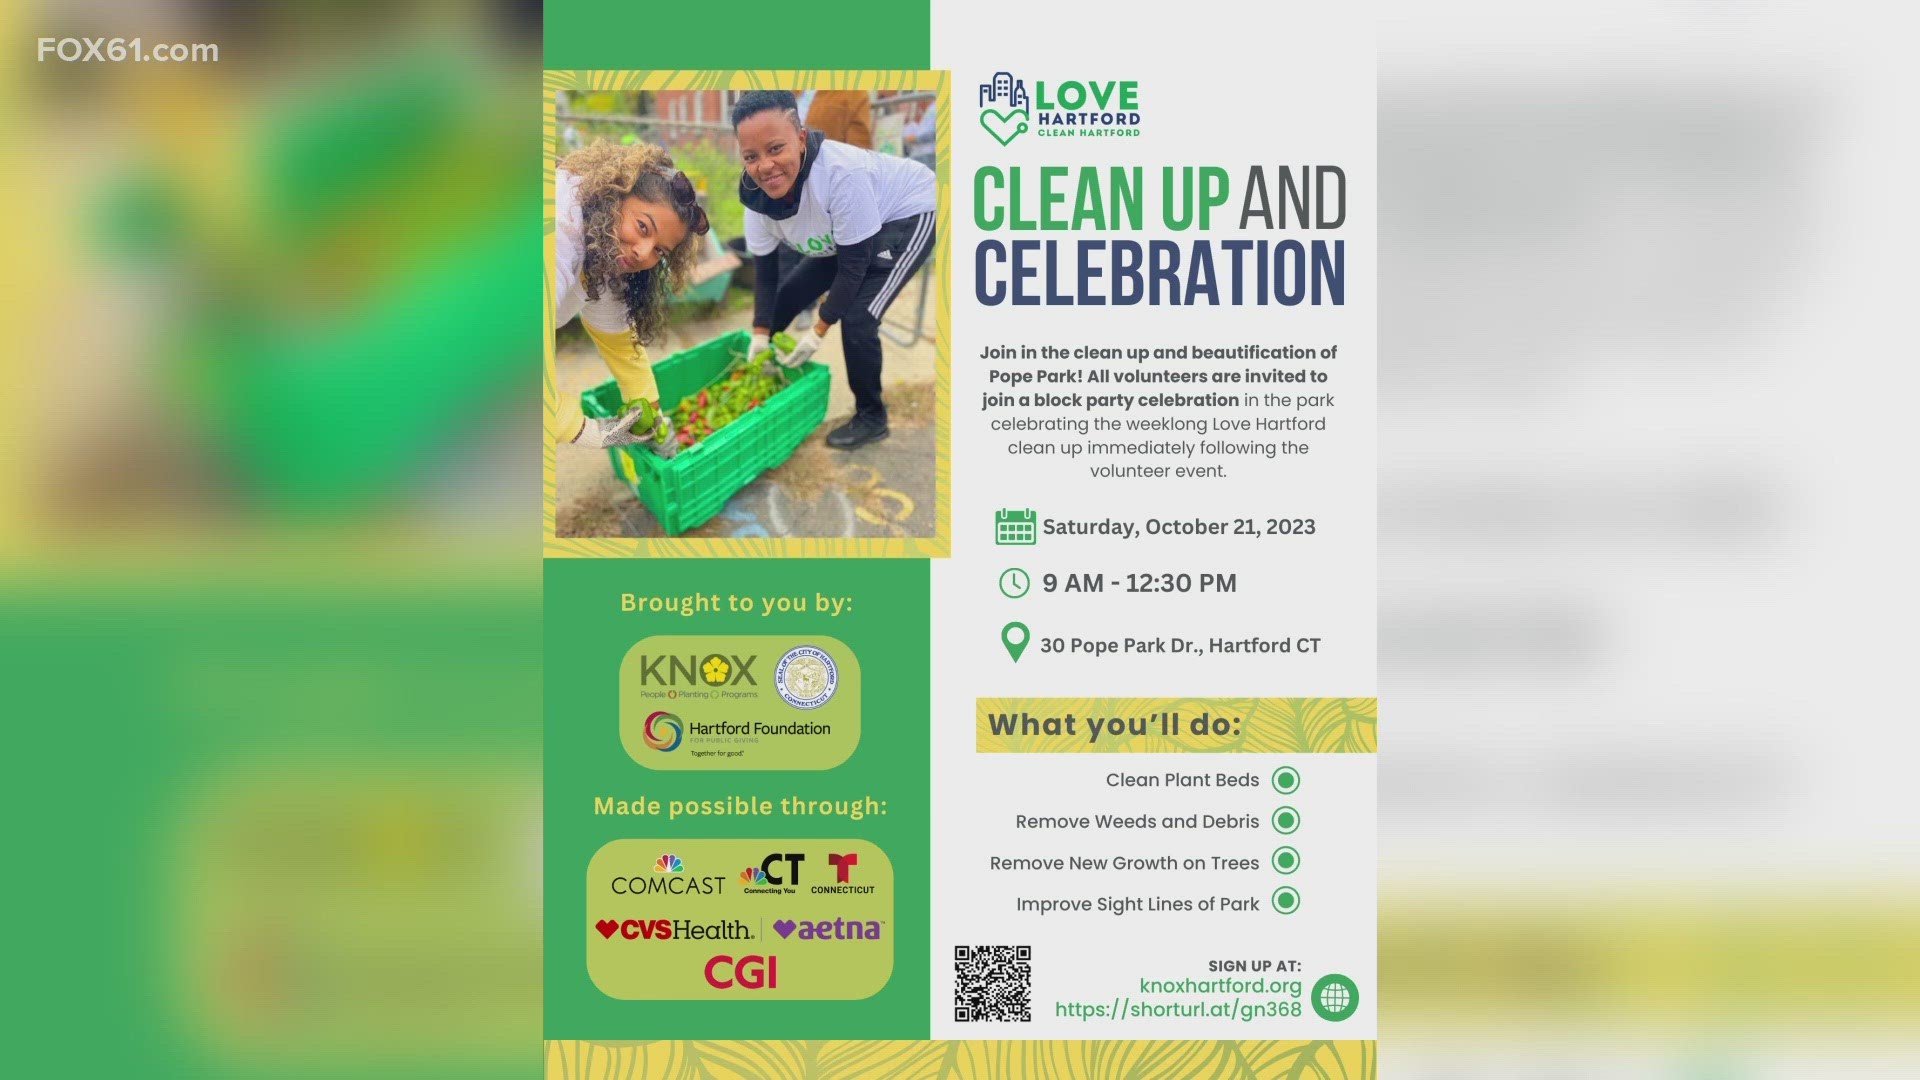 It's 'Love Hartford Week,' which is a week-long initiative that's dedicated to civic service and giving back to the city.